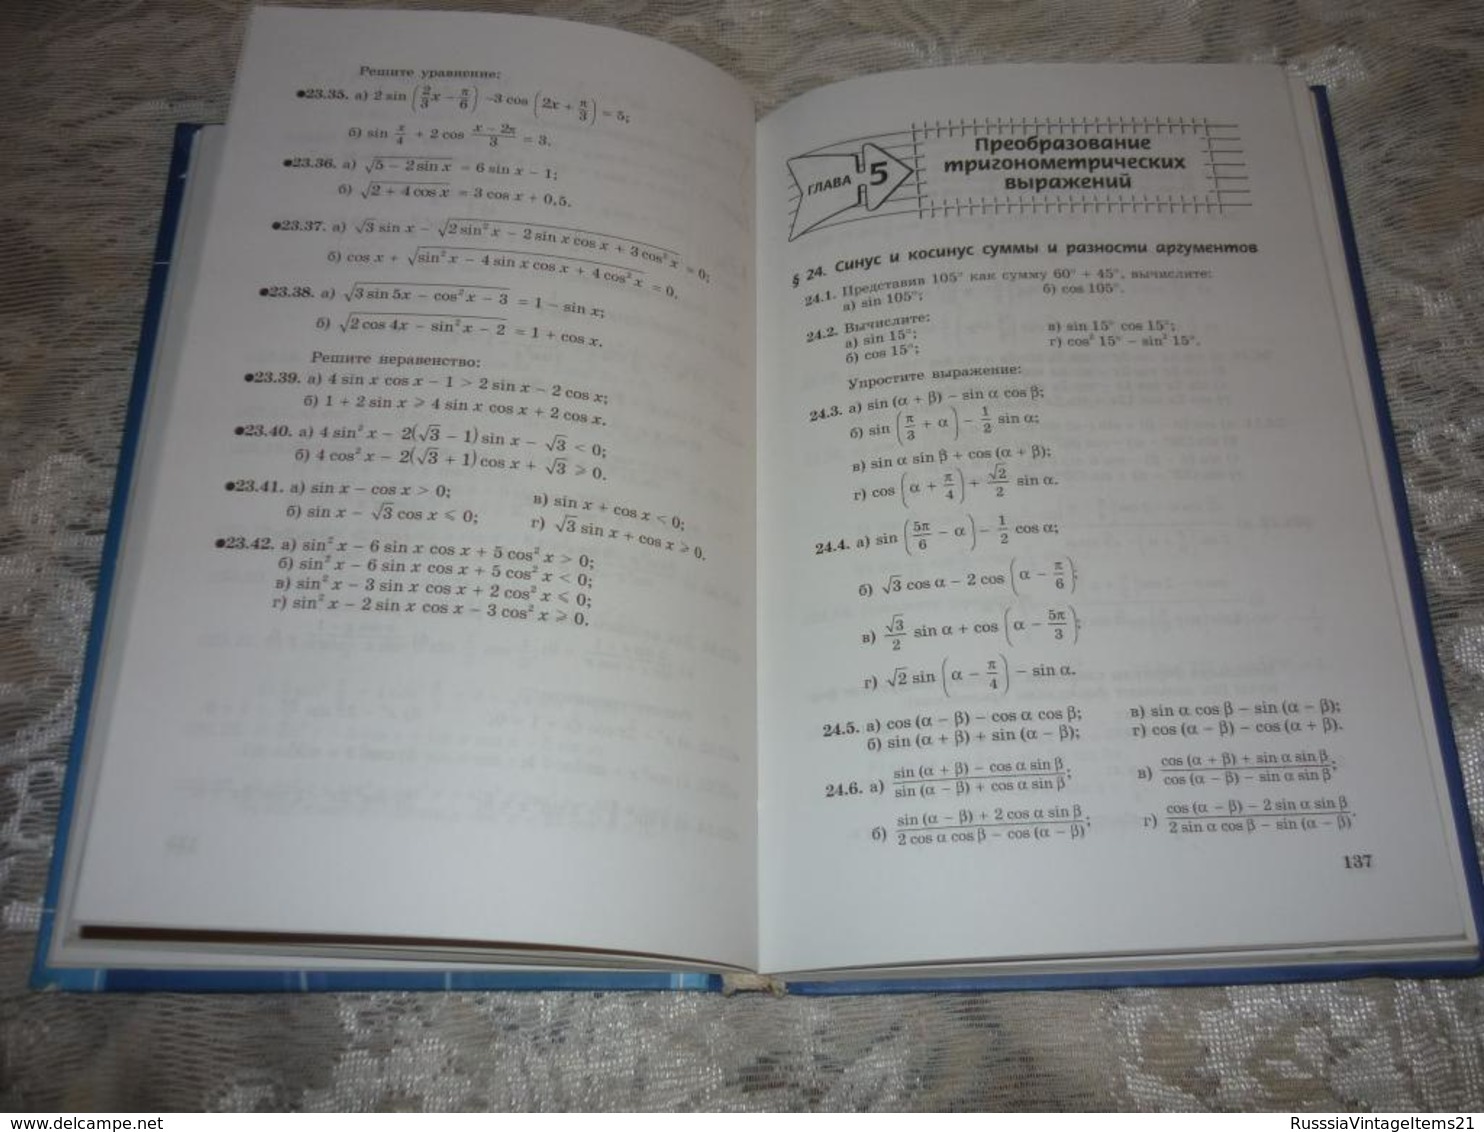 Russian Textbook - In Russian - Textbook From Russia - Mordkovich A. Algebra And The Beginning Of The Analysis. Grade 10 - Slav Languages